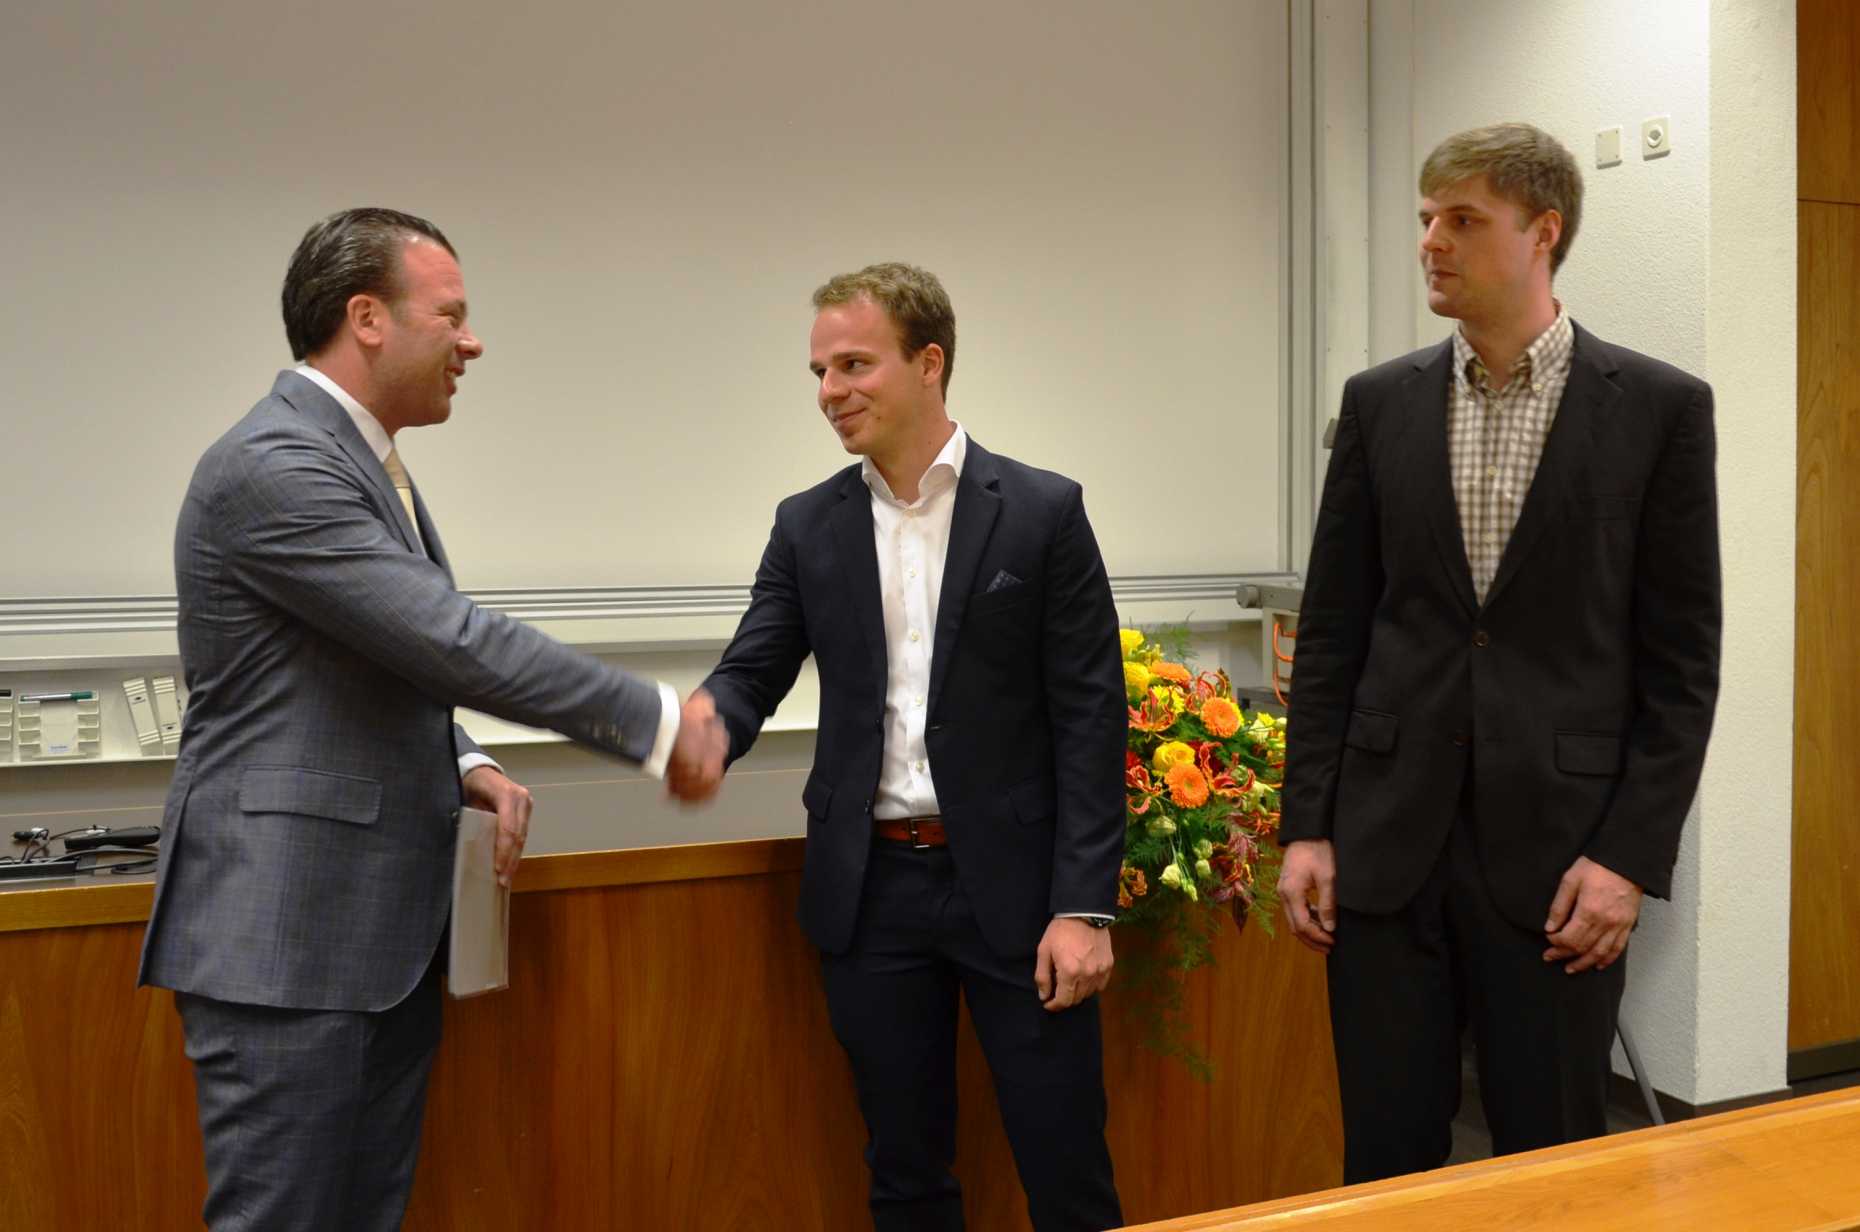 Enlarged view: Martin Gähwiler awards Jens Hunhevicz and Samuel Joss with the Helbling Prize